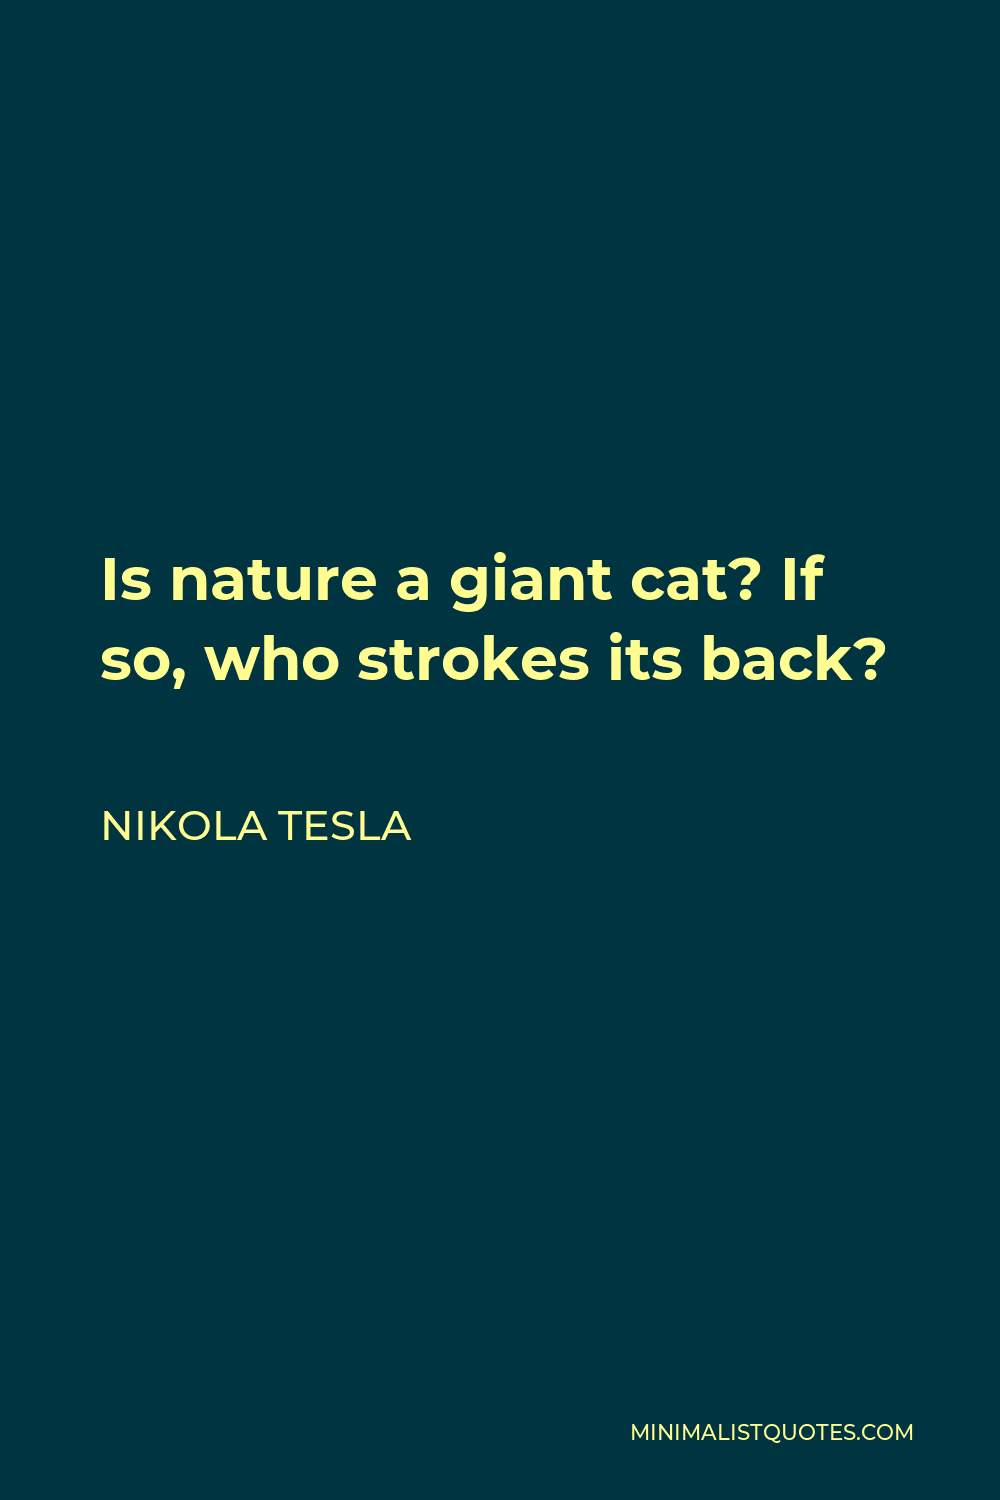 Nikola Tesla Quote - Is nature a giant cat? If so, who strokes its back?